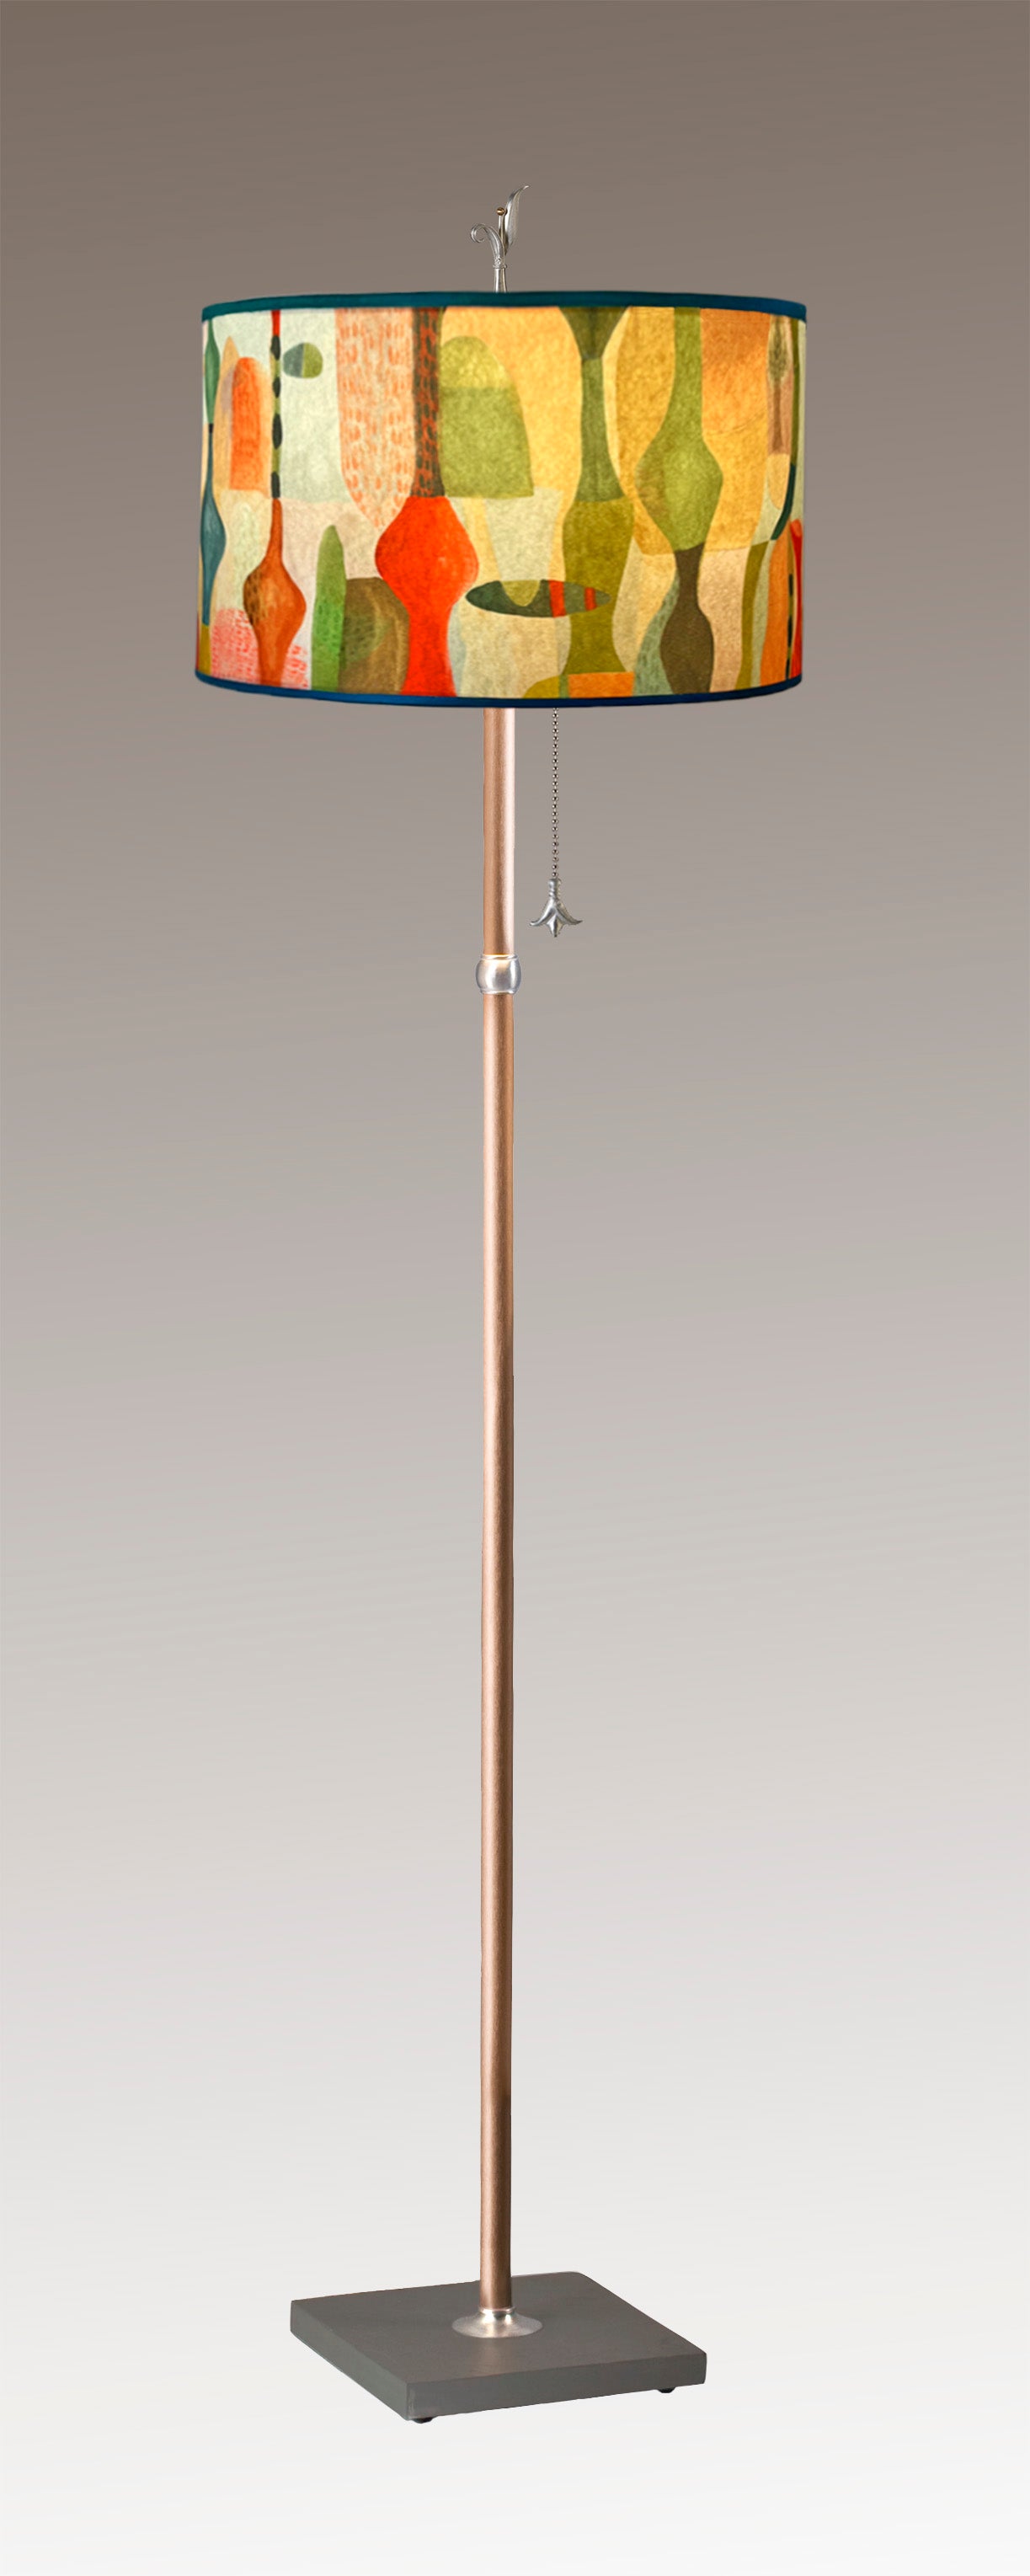 Janna Ugone & Co Floor Lamp Copper Floor Lamp with Large Drum Shade in Riviera in Poppy